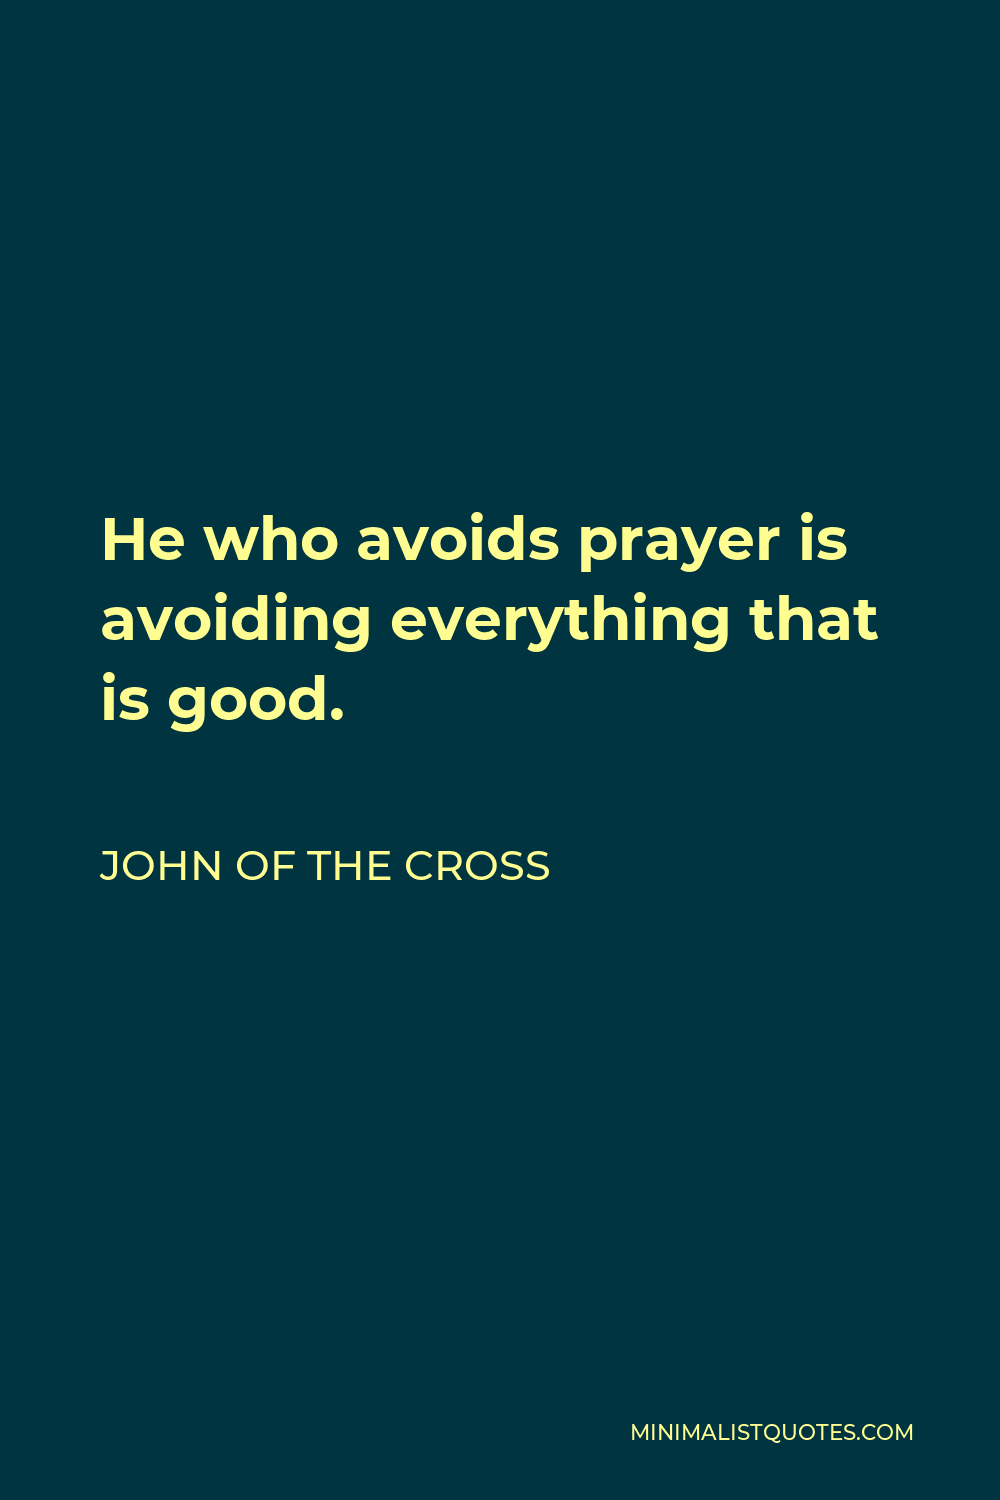 John of the Cross Quote - He who avoids prayer is avoiding everything that is good.